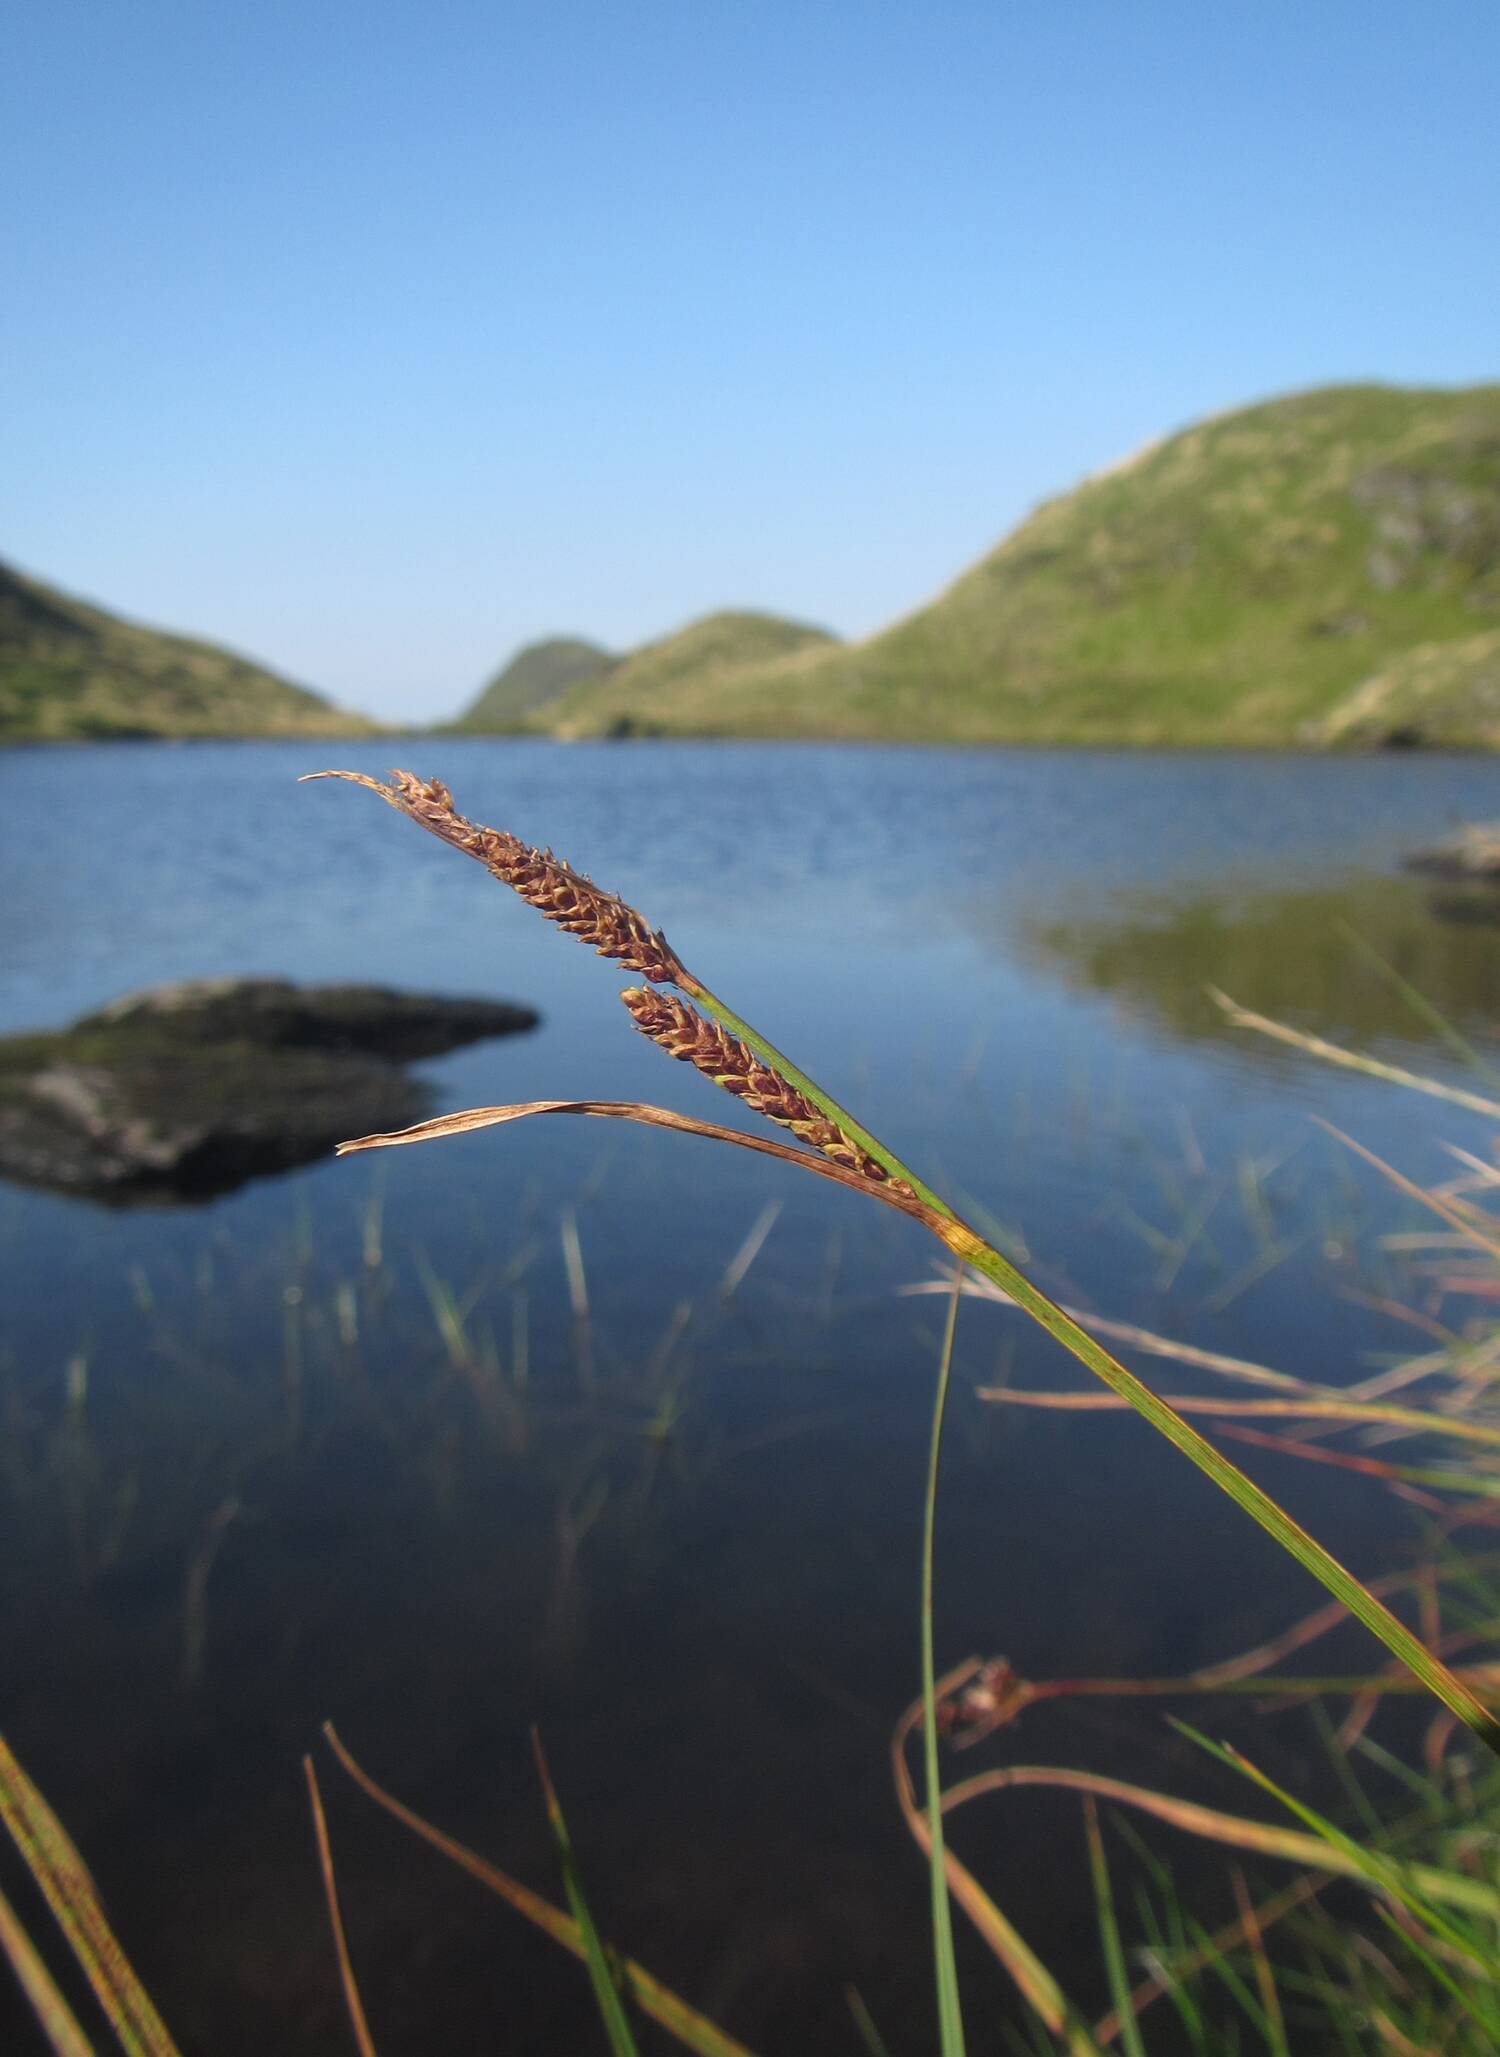 A close-up of a blade of sedge, growing on the edge of a lochan. The sky and water are a deep blue.